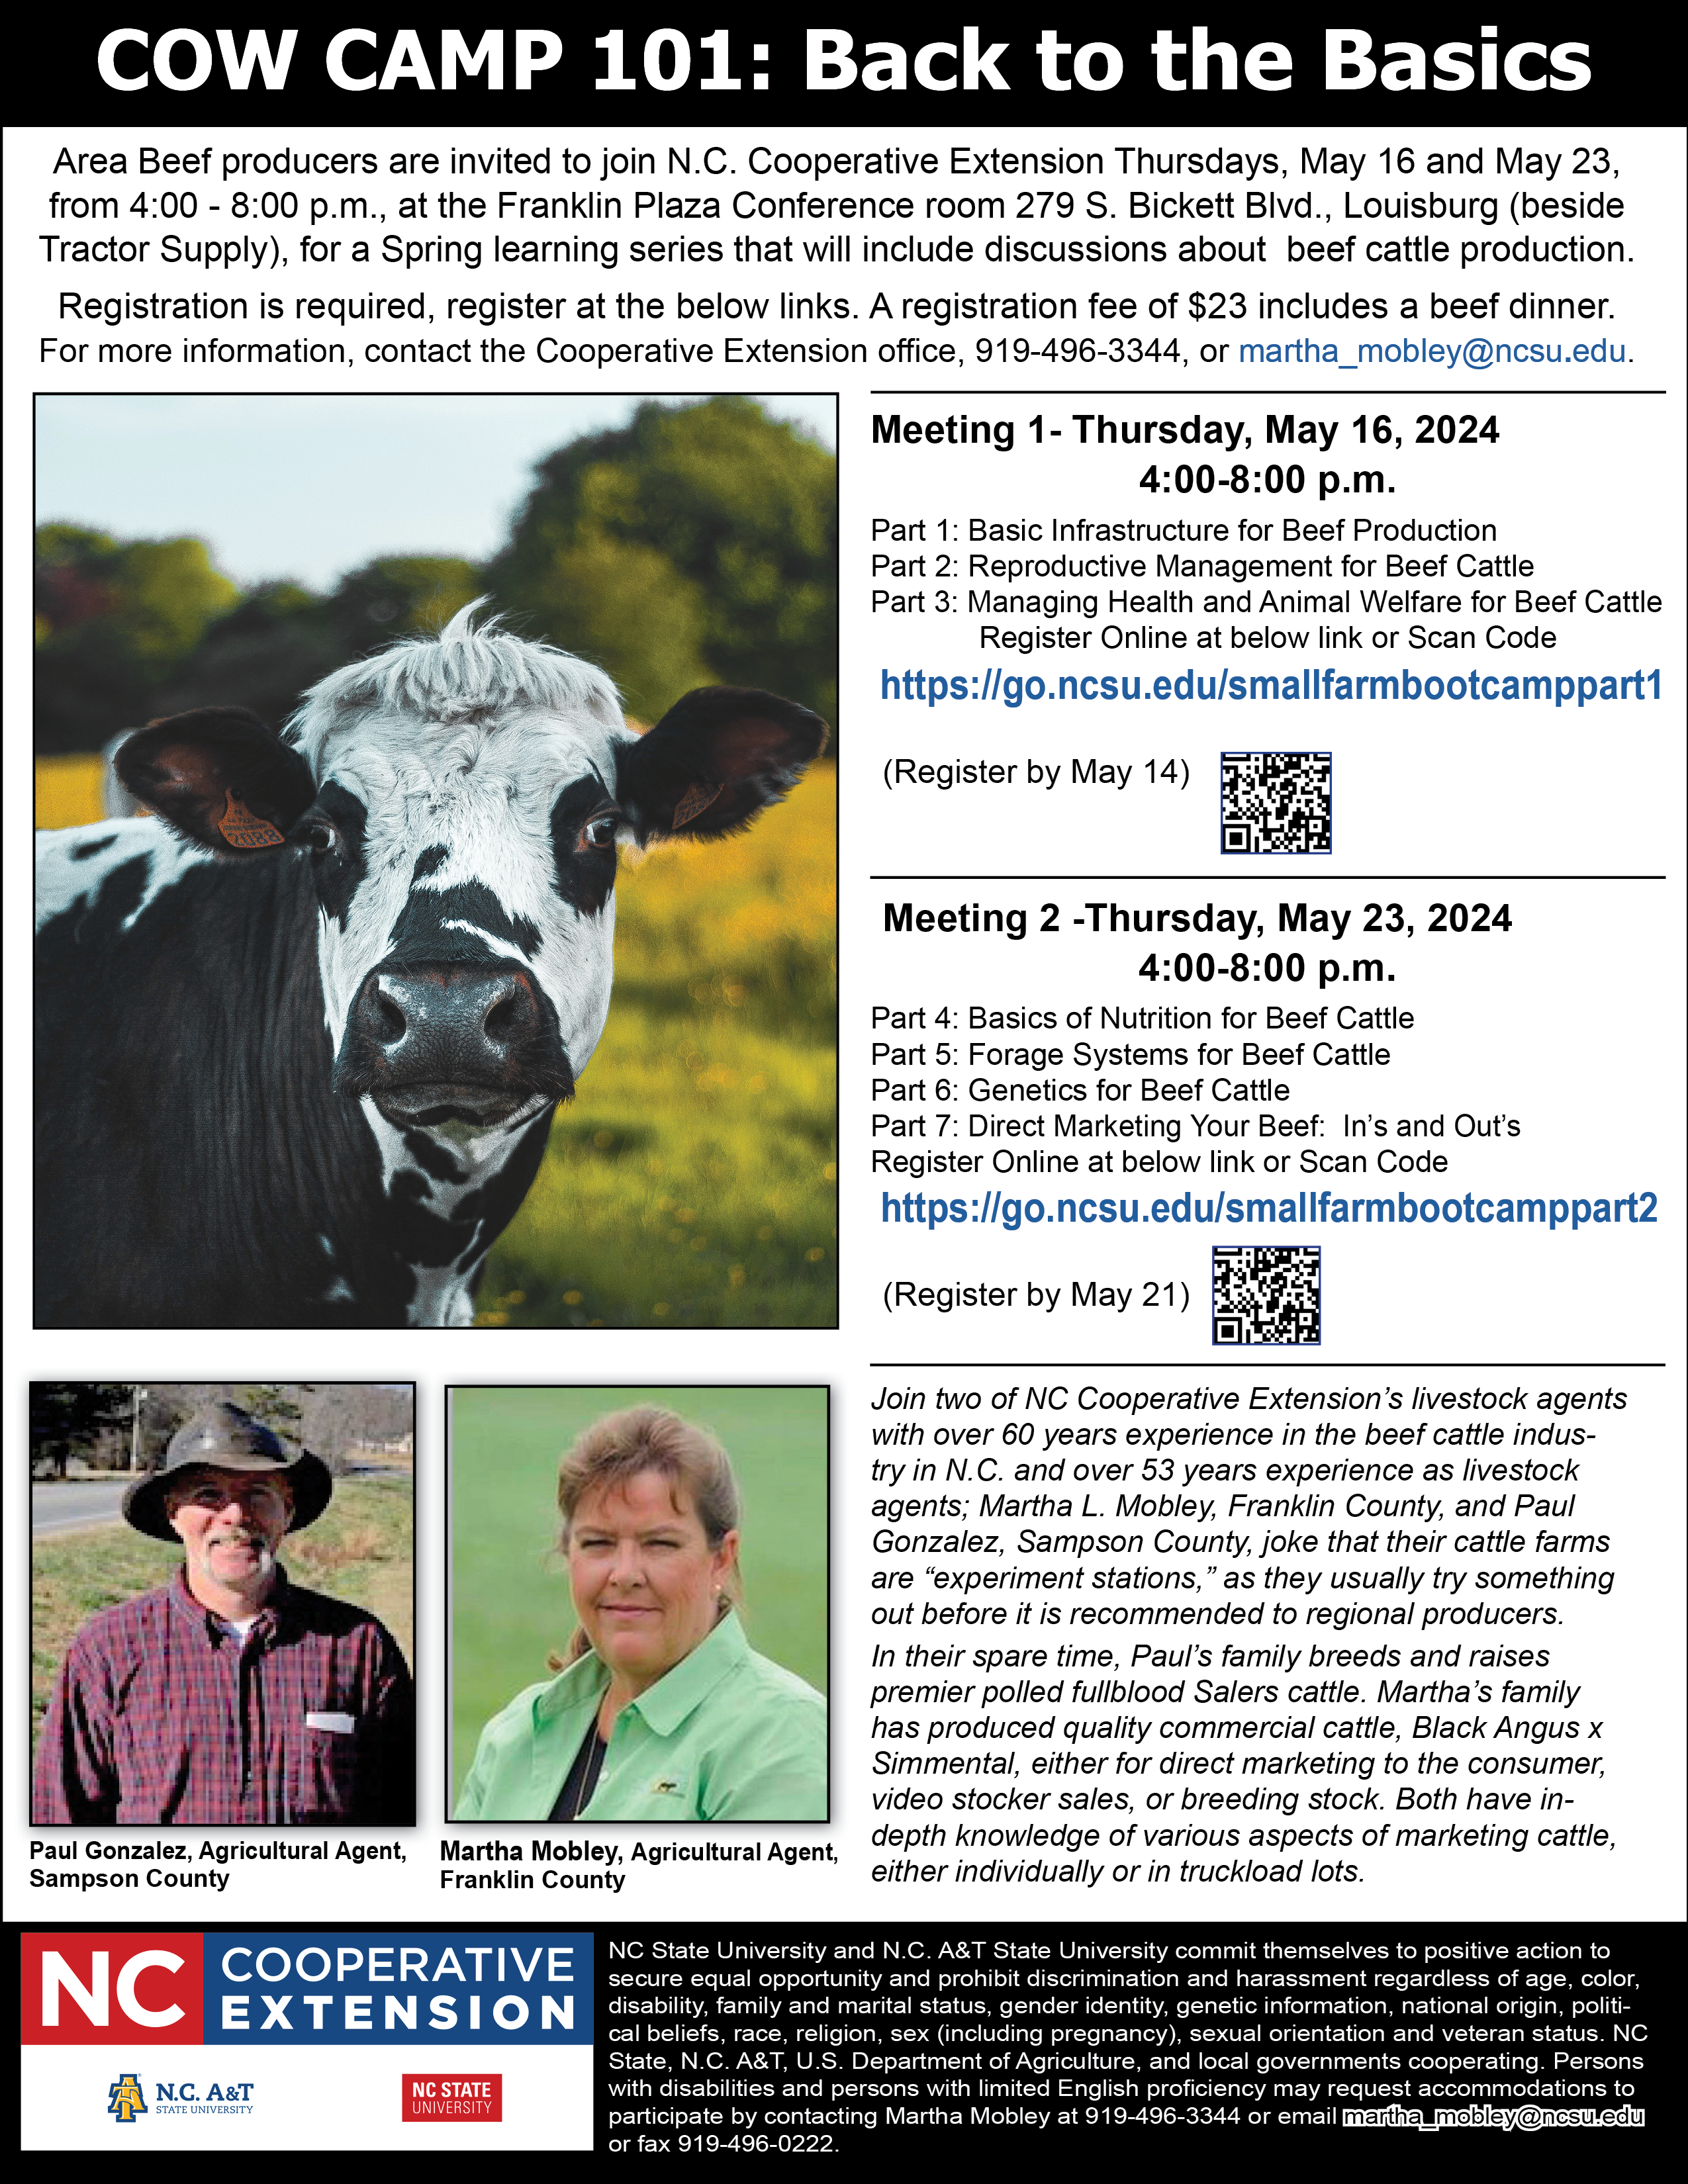 Cow Camp 101 meeting series flyer with description, dates, times, ag agents, and venue info.